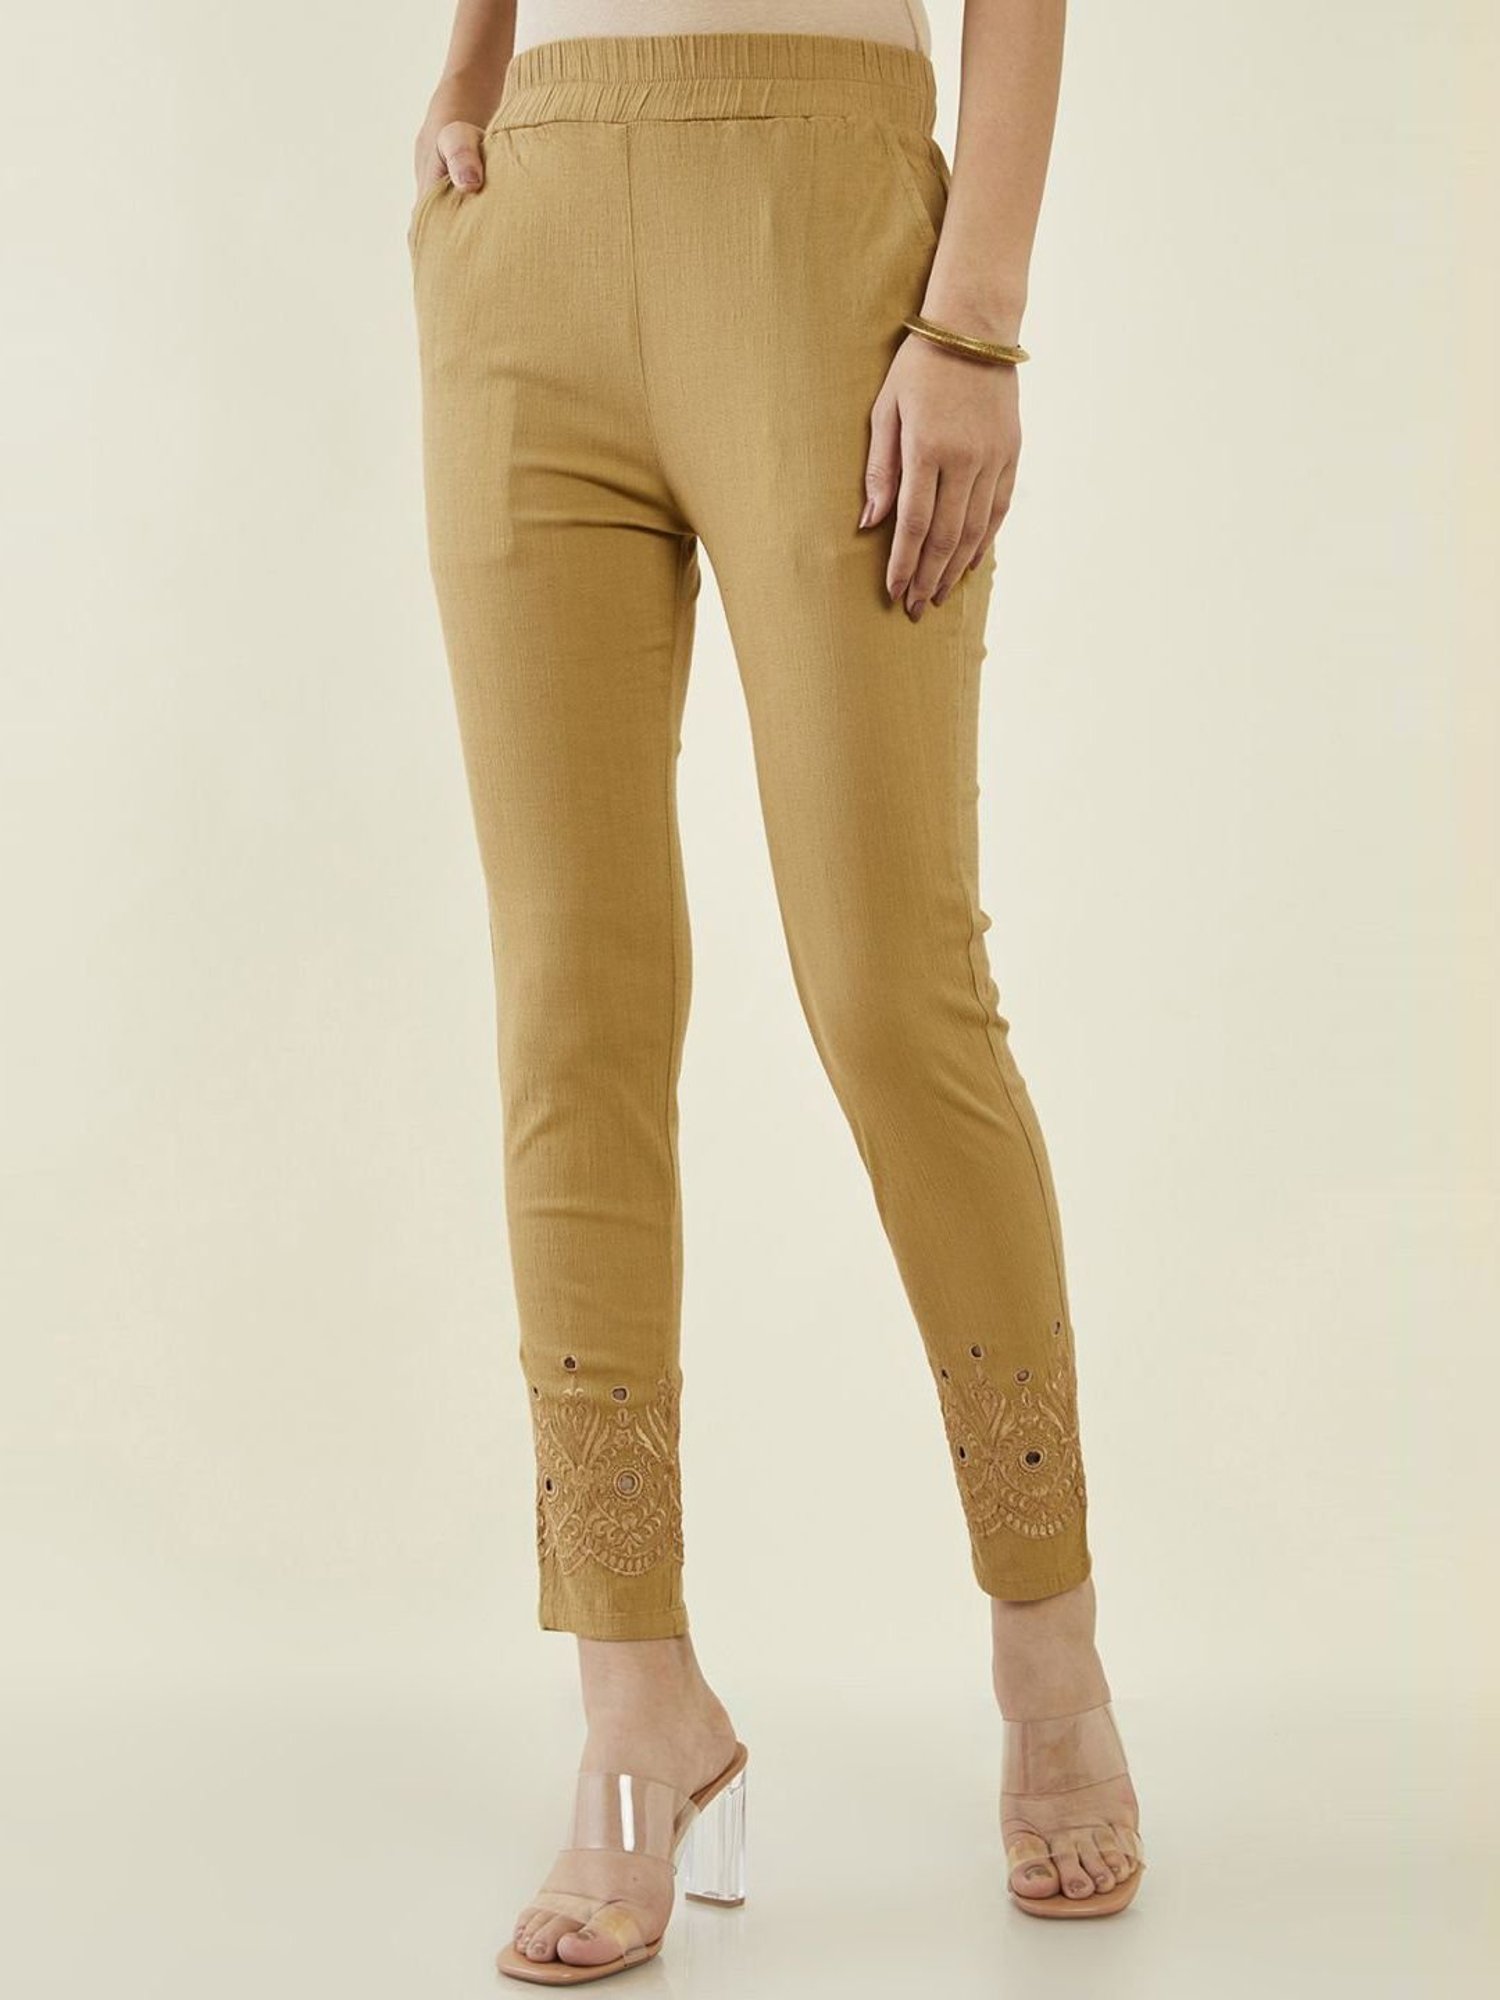 Khaadi Trouser in Beige with Embroidery bottom - Sizes 12 or 14 | eBay